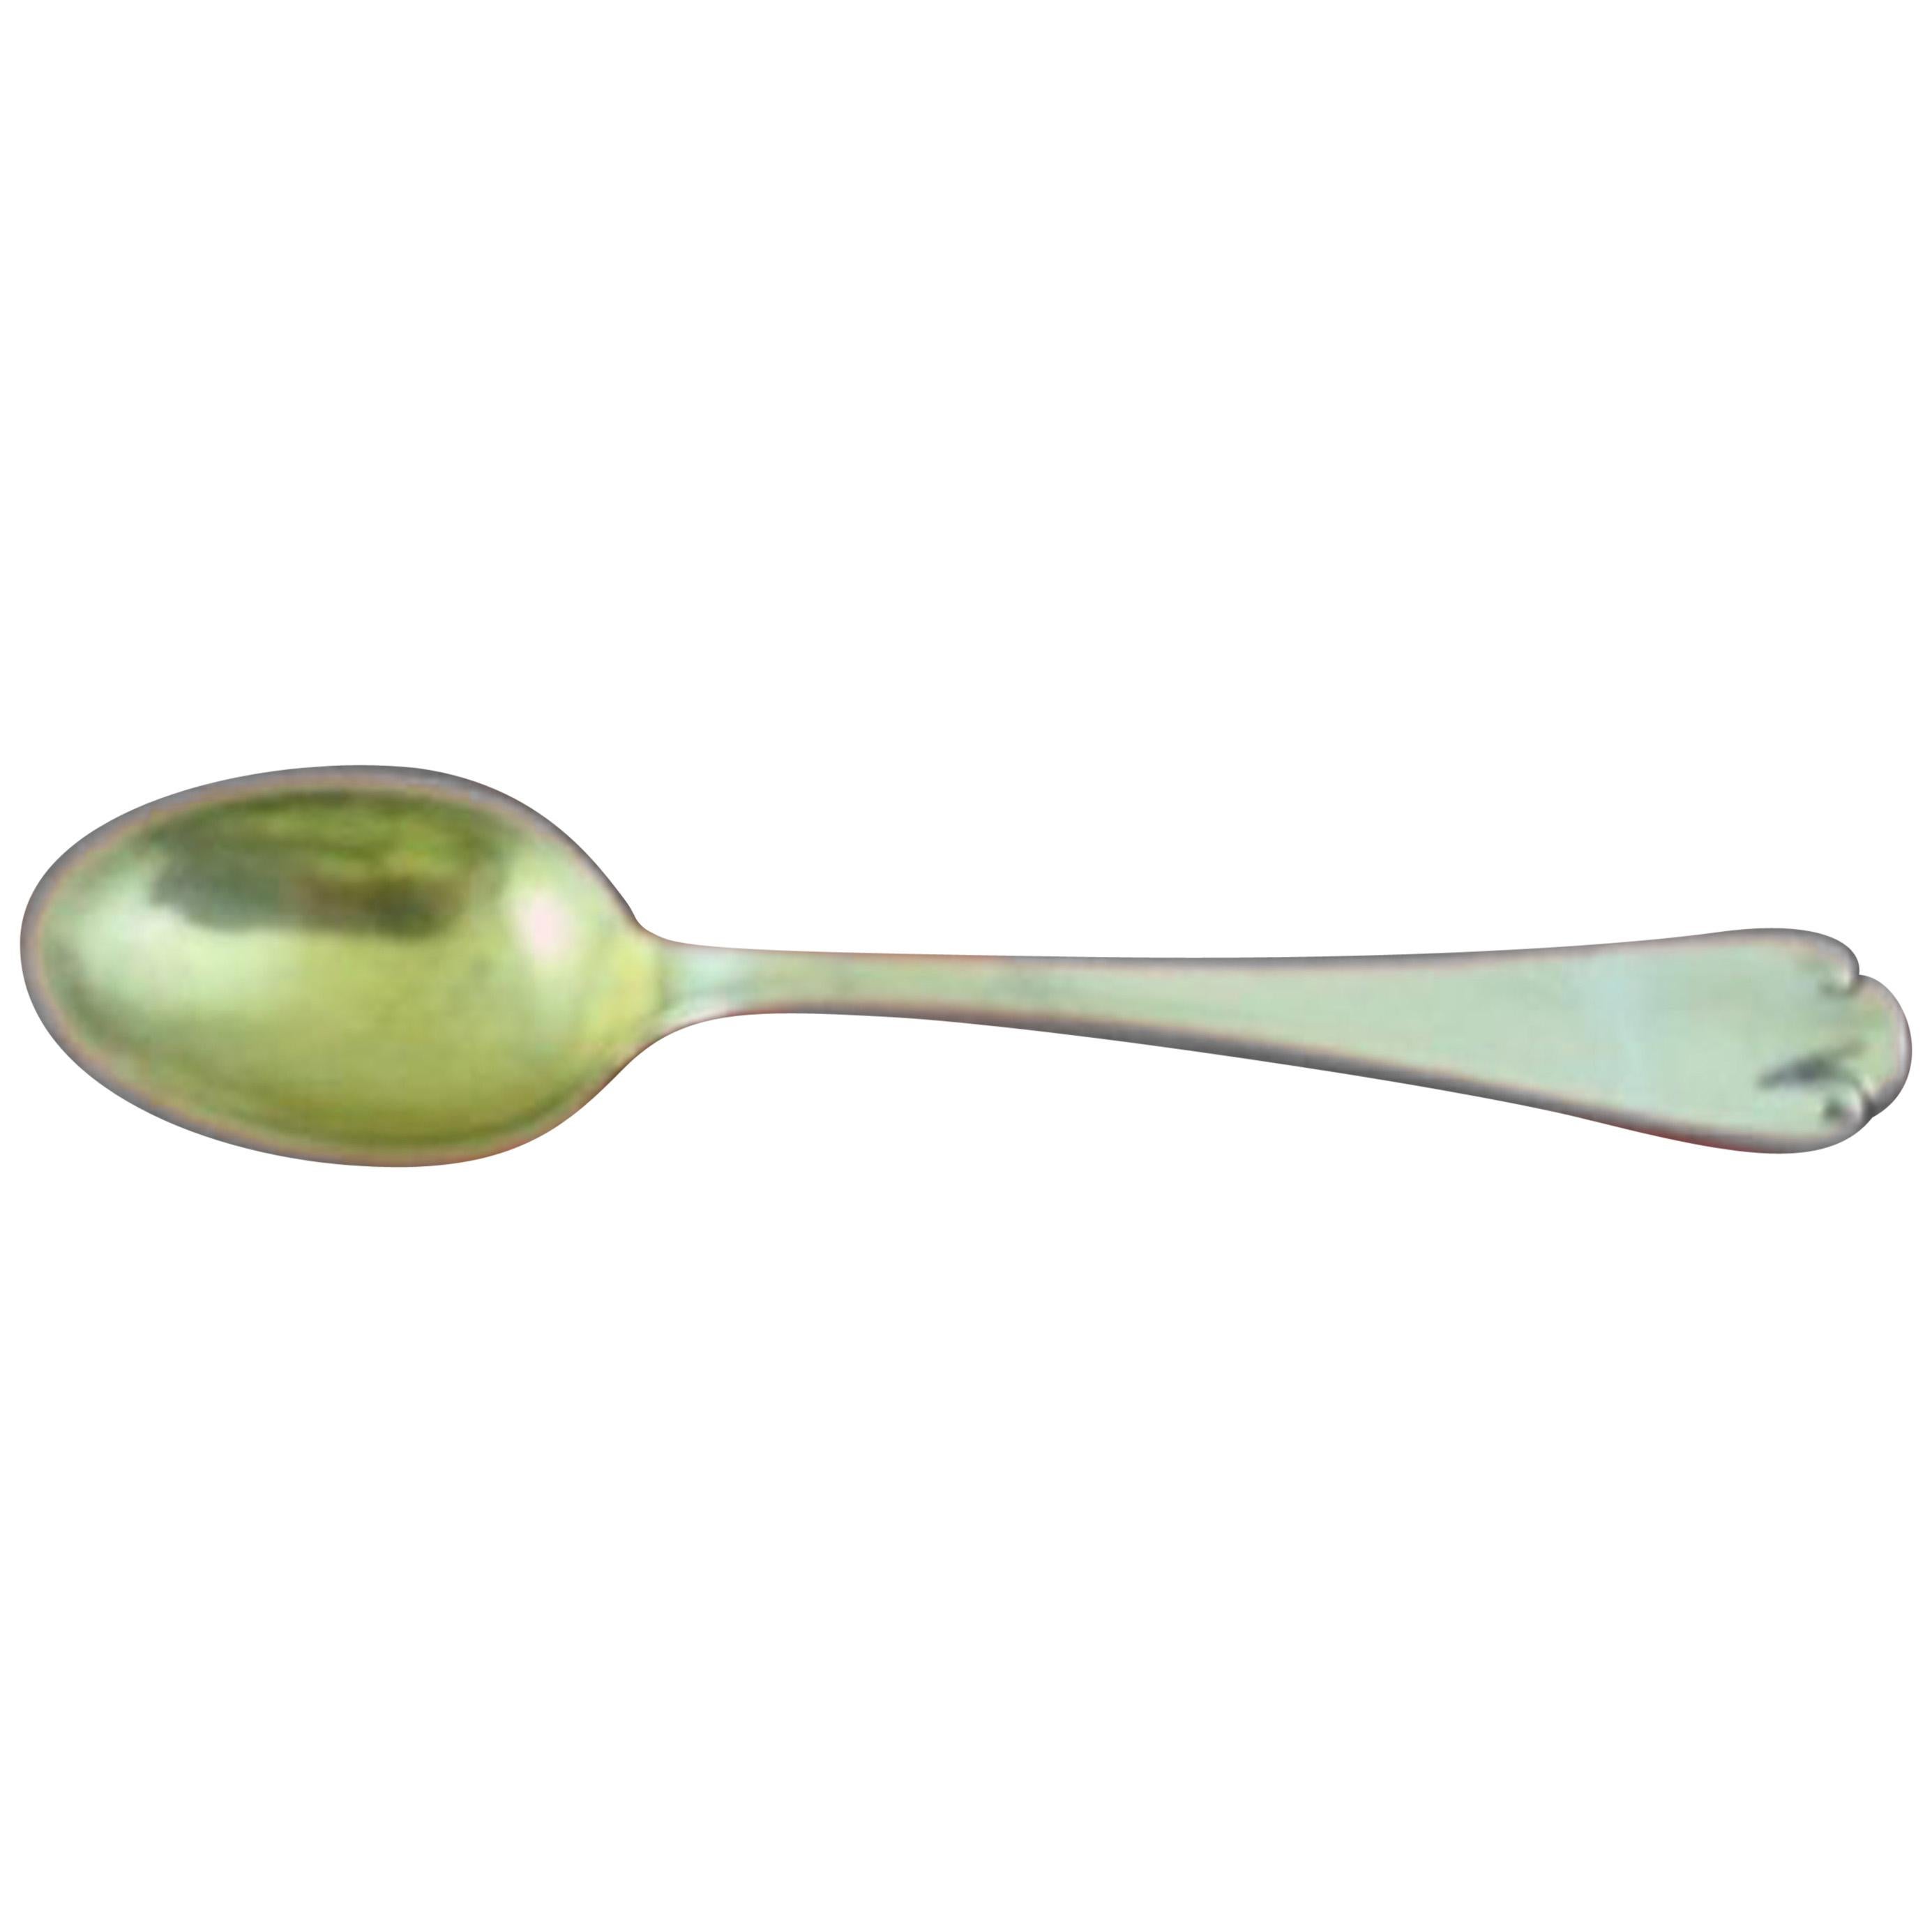 Flemish by Tiffany & Co. Sterling Silver Demitasse Spoon Gold Washed